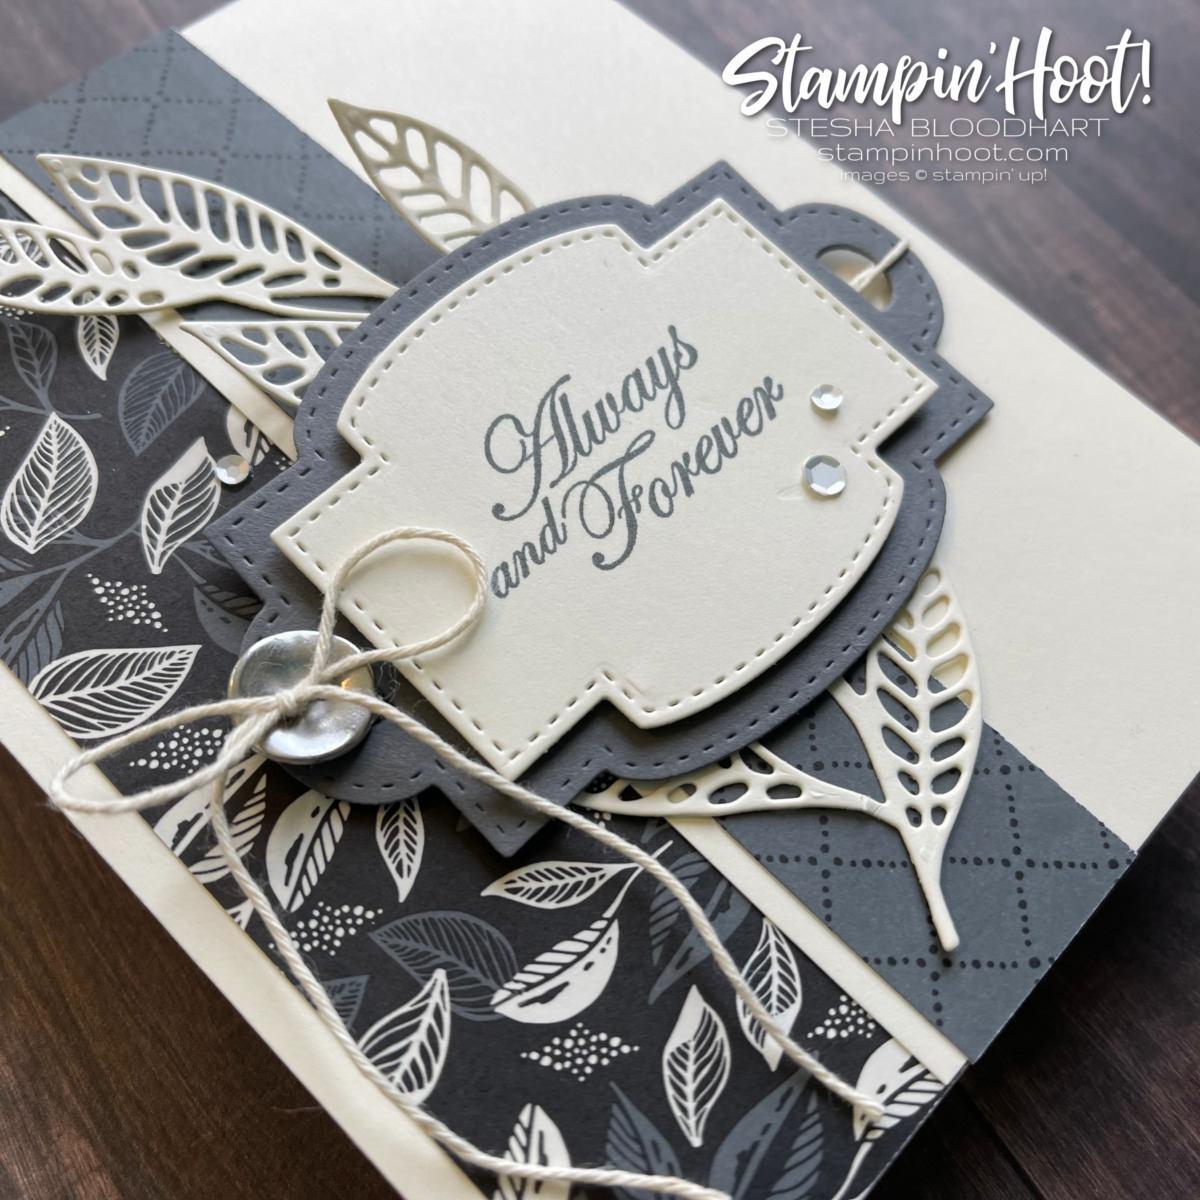 Always & Forever Card using the Simply Elegant DSP and Stitched So Sweetly Dies by Stampin' Up! Stesha Bloodhart, Stampin' Hoot!